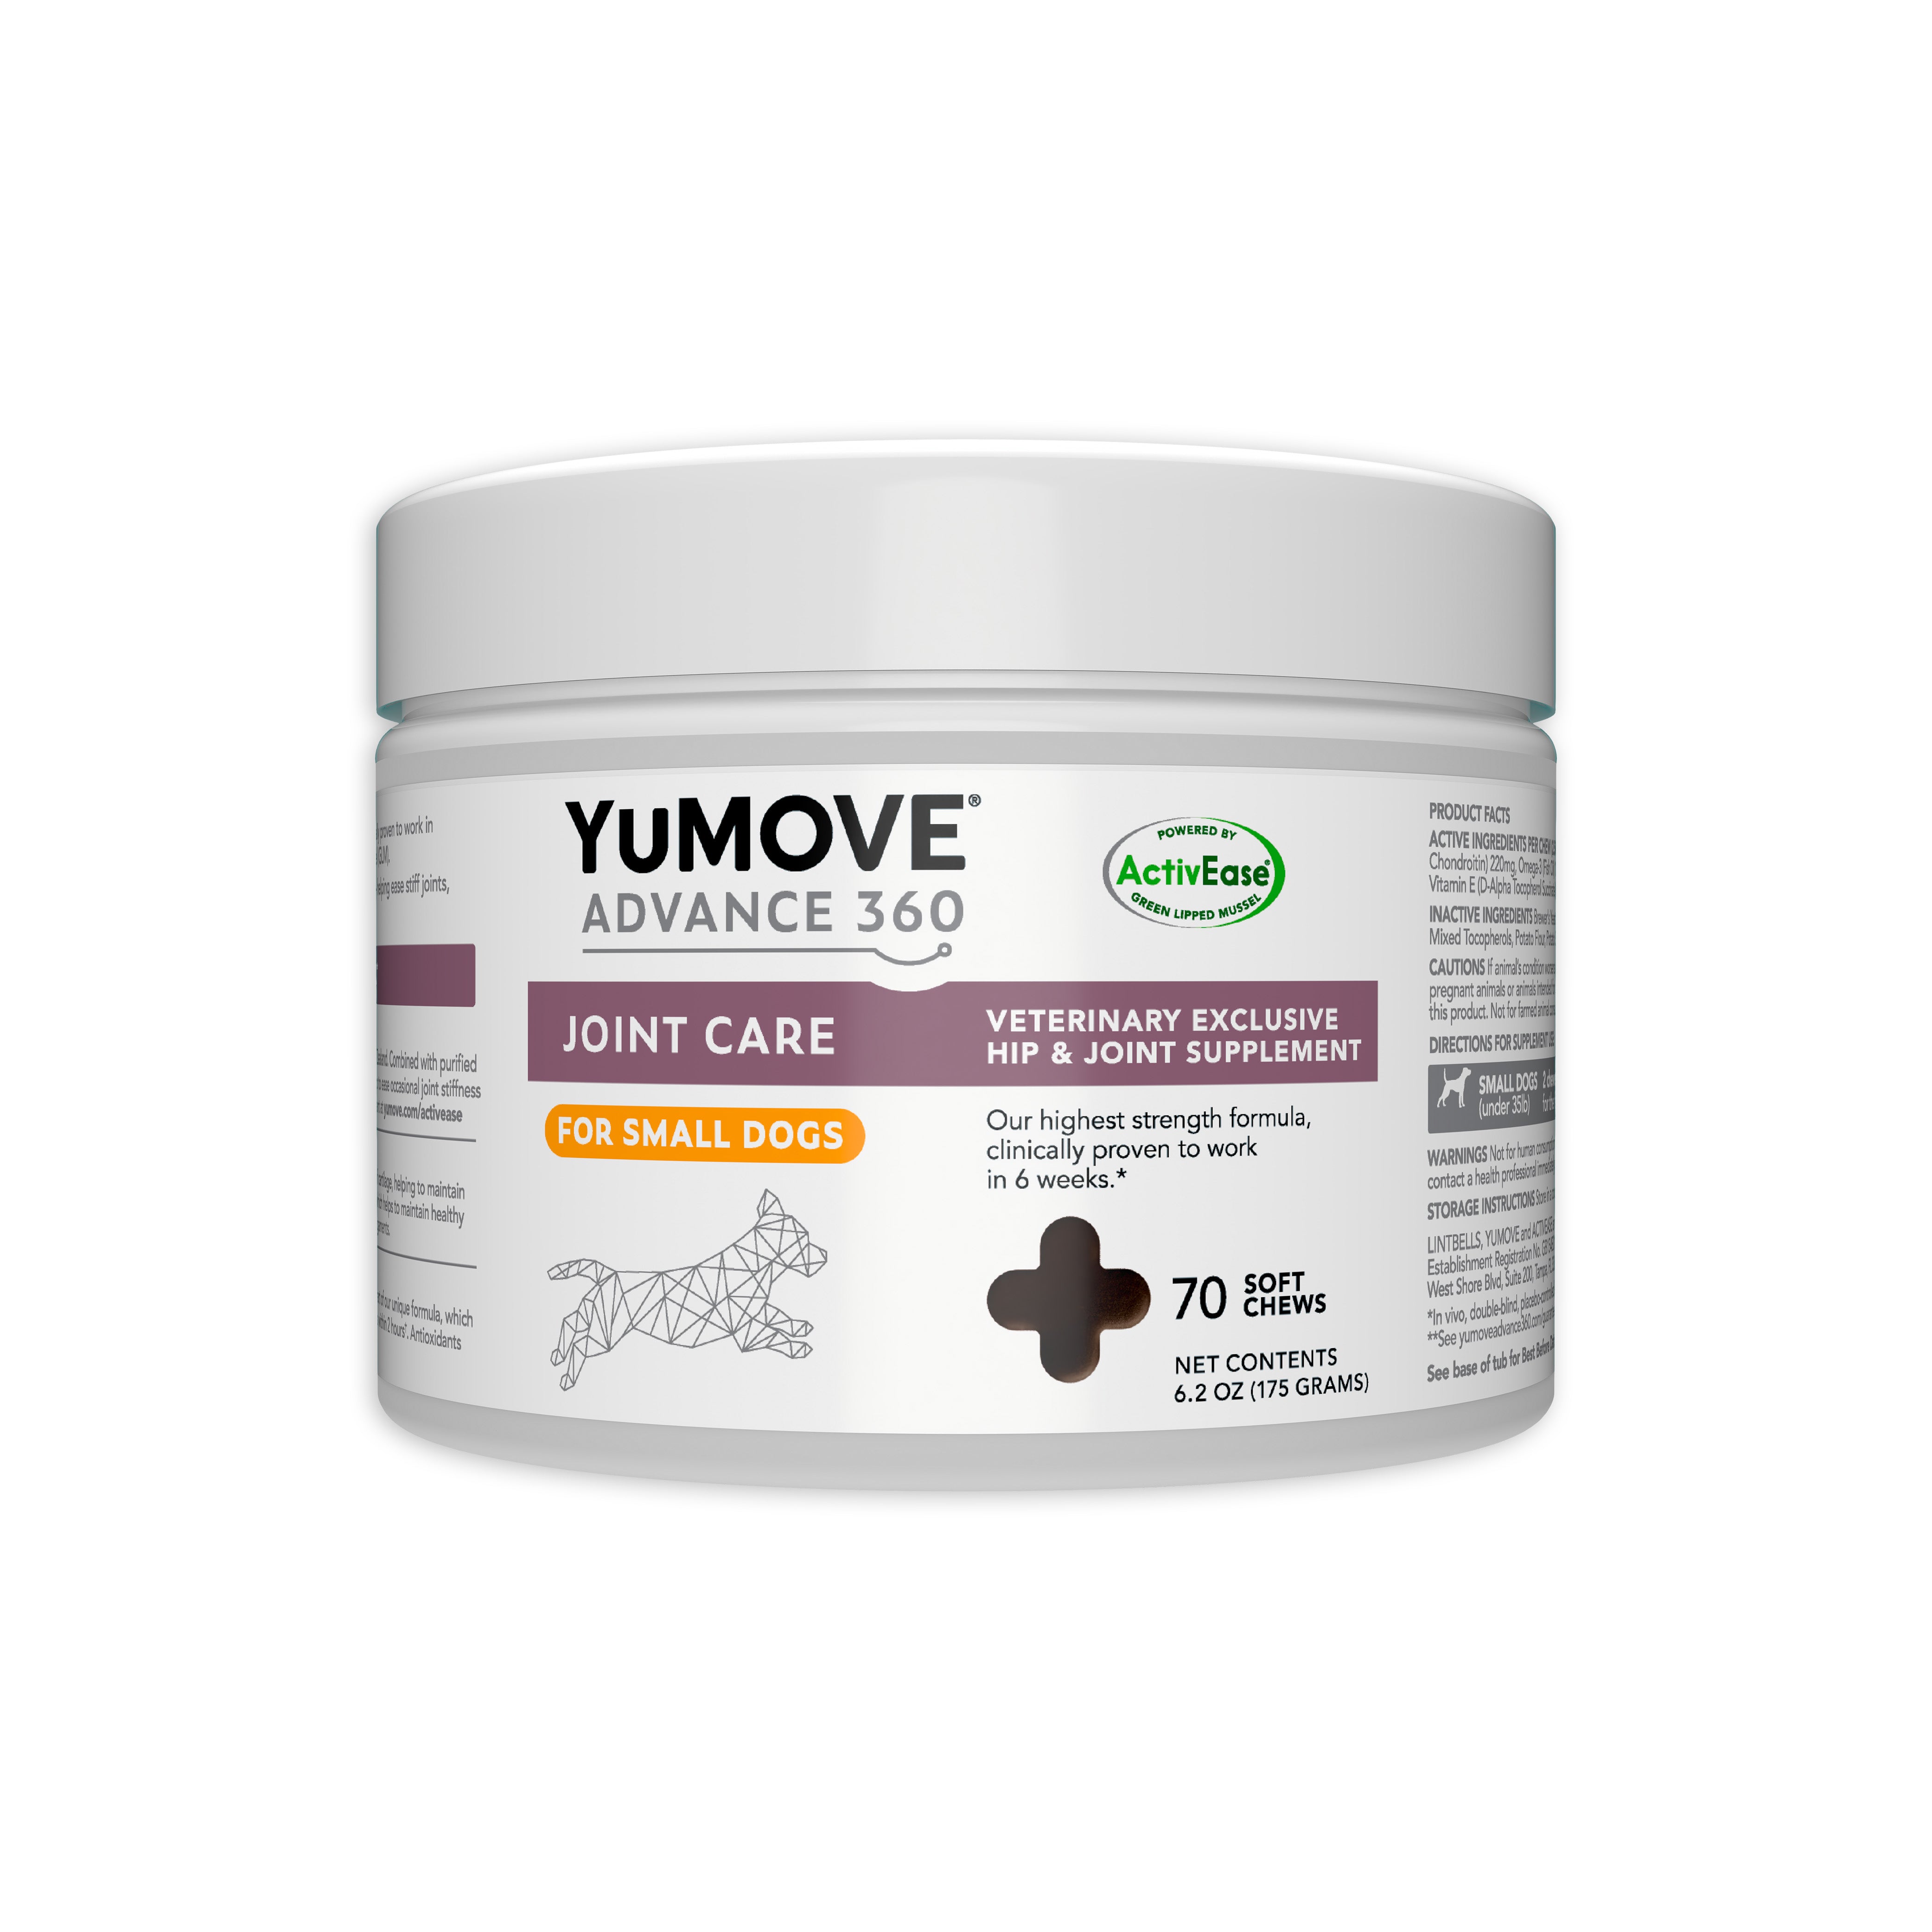 A container of YuMOVE ADVANCE 360 Joint Care for Small Dogs, with a wireframe dog illustration, labeled as a veterinary exclusive hip & joint supplement, and indicating 70 soft chews, net contents 6.2 oz (175g).